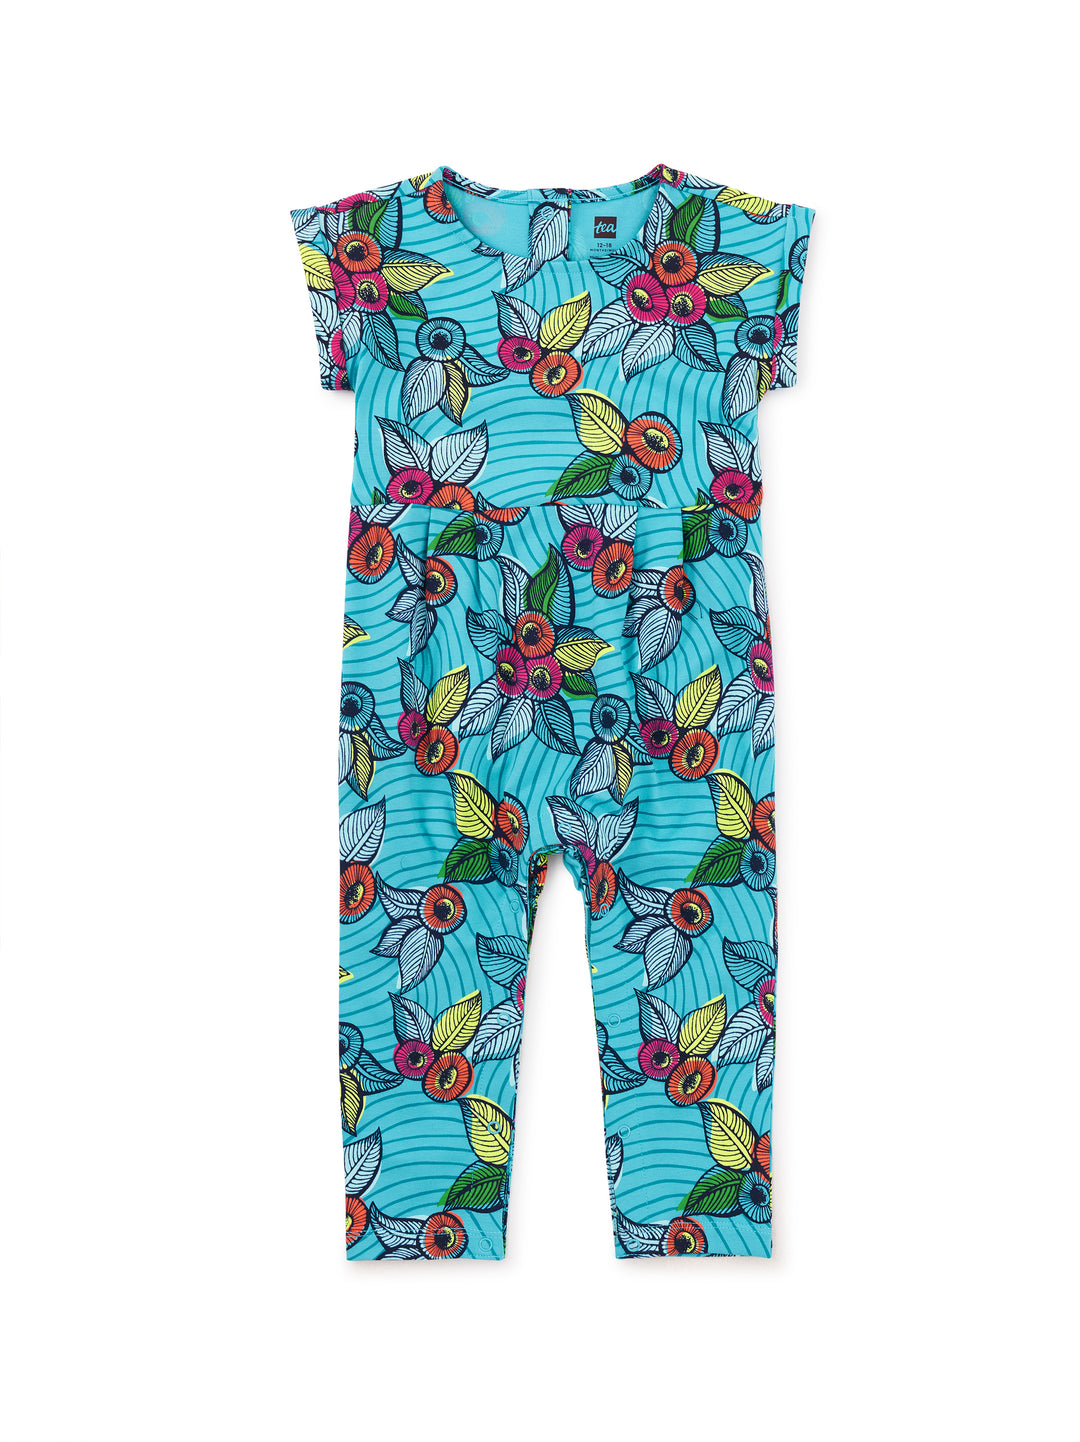 Tea Collection Cuff Sleeve Baby Romper - African Jewel Floral